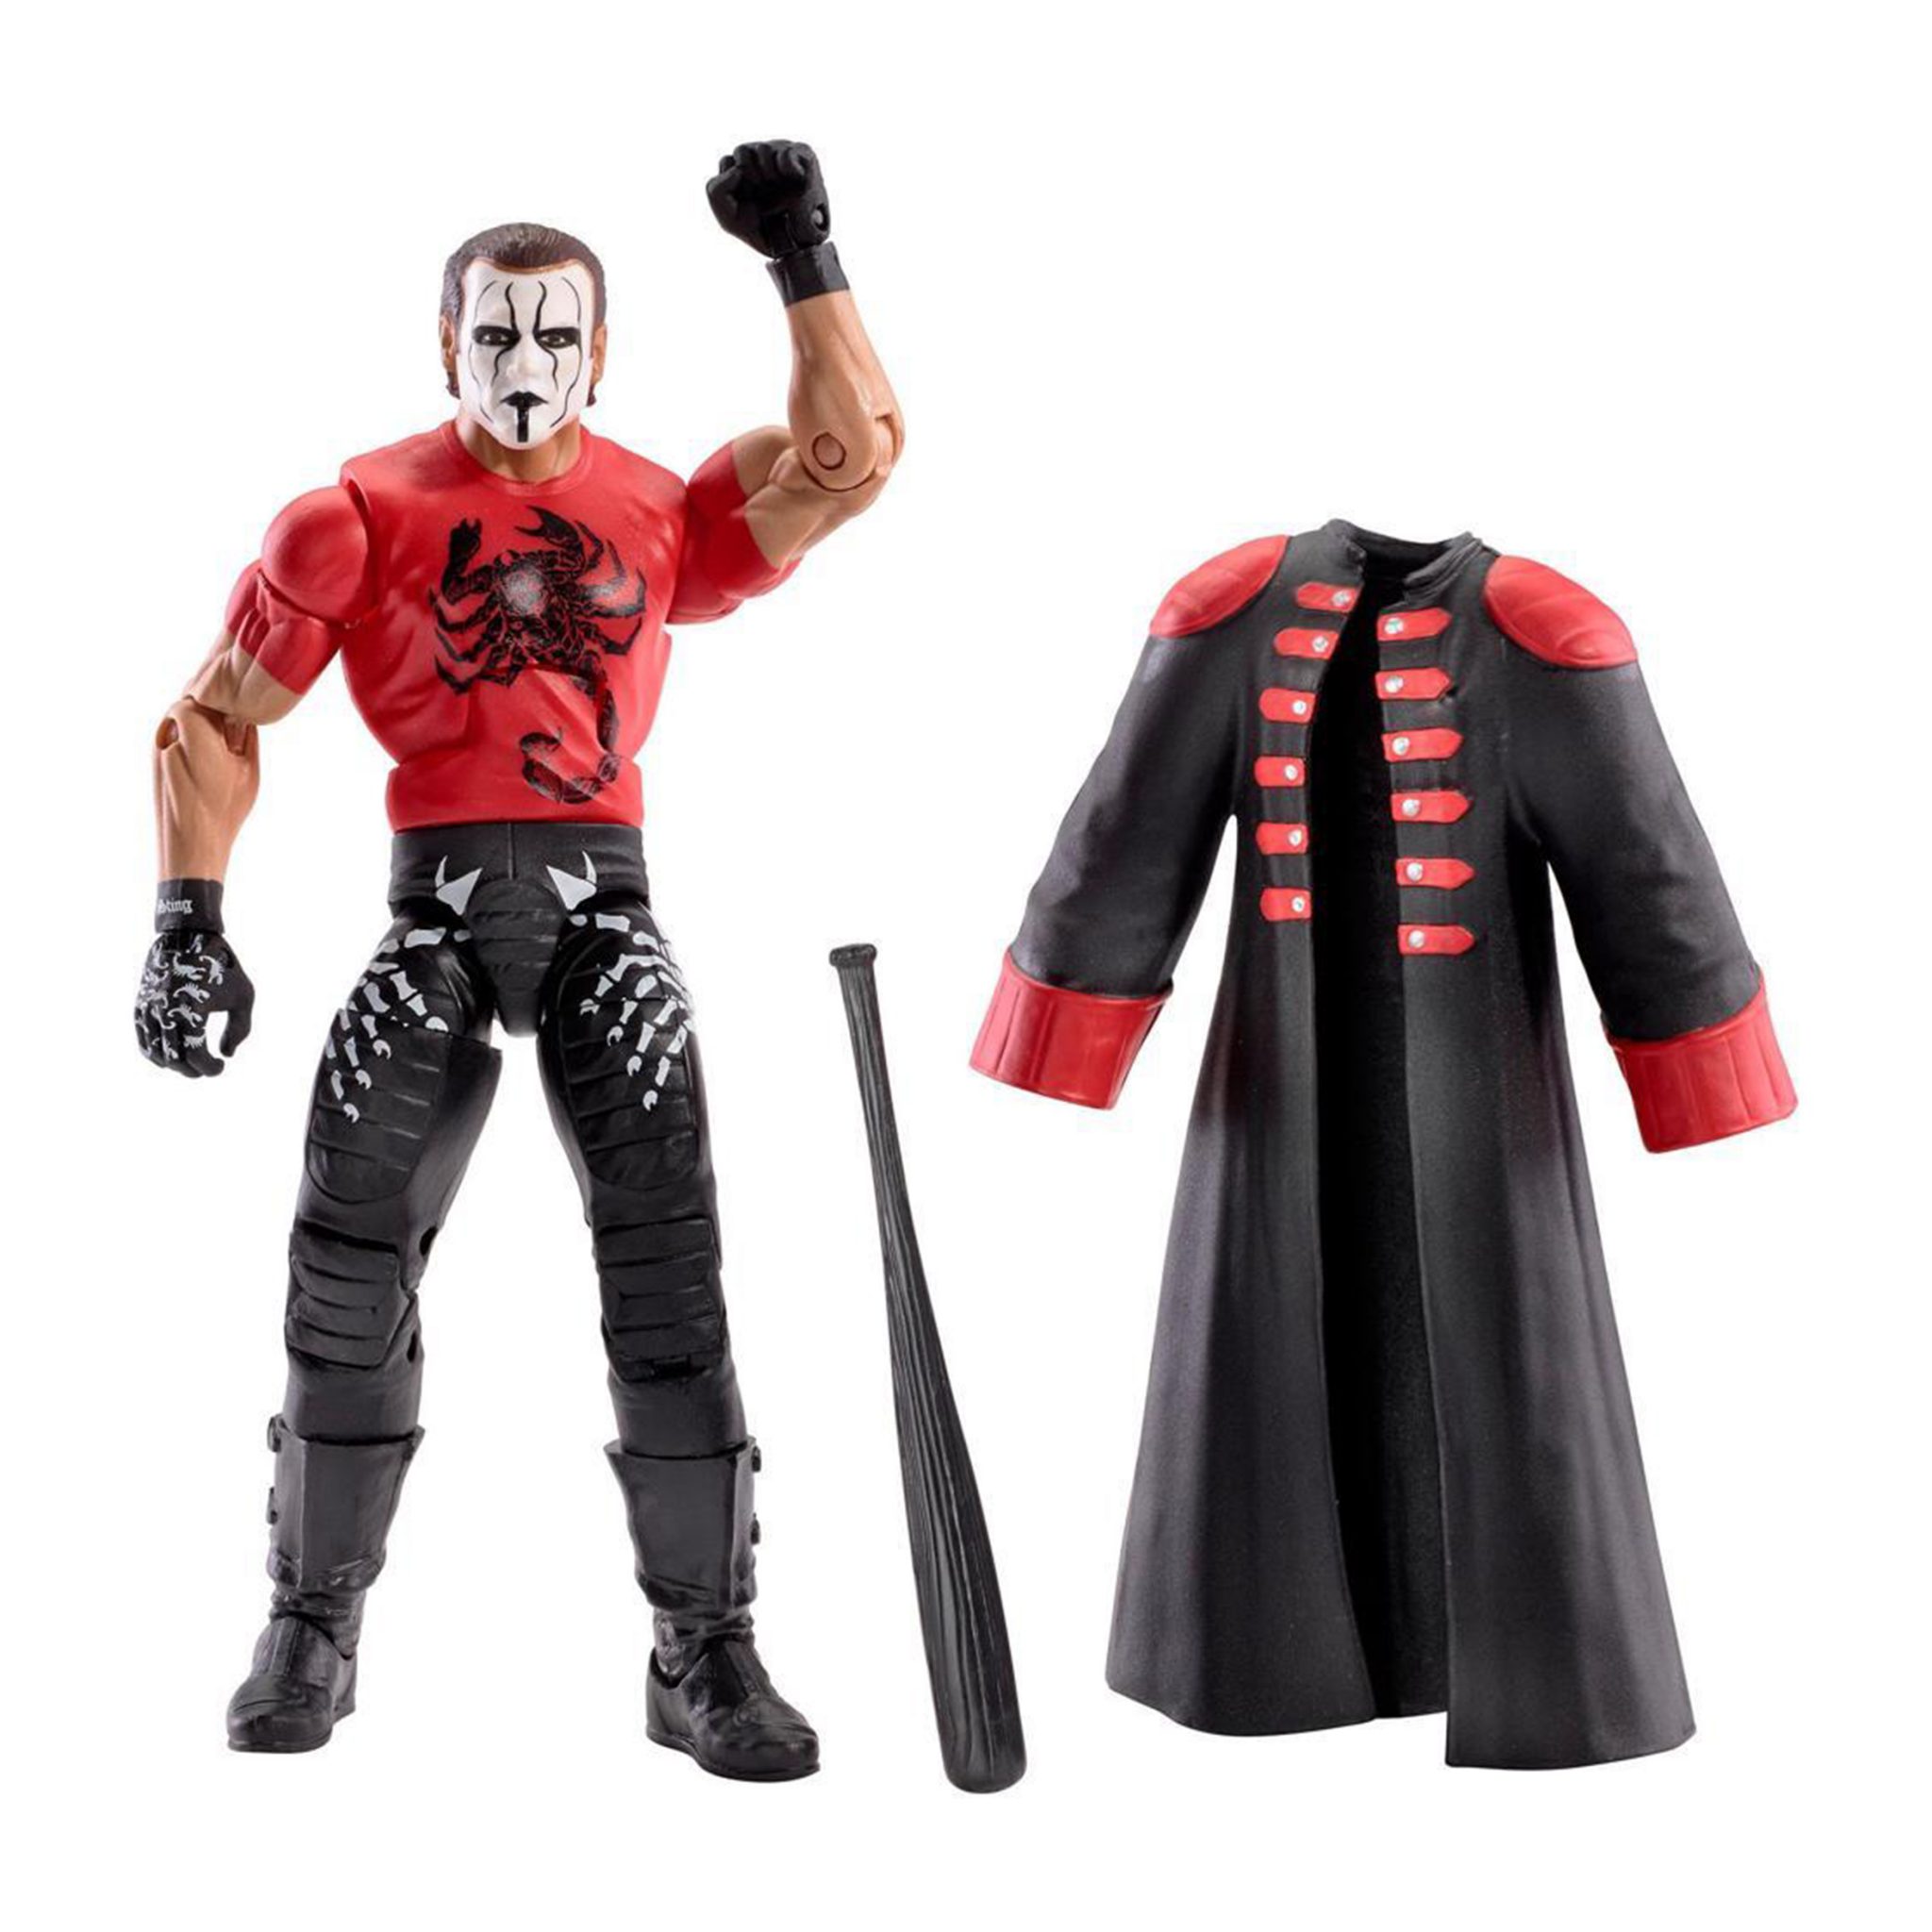 STING WWE Mattel Elite Collection Series 39 Wrestling Action Figure Toy IN HAND for sale online